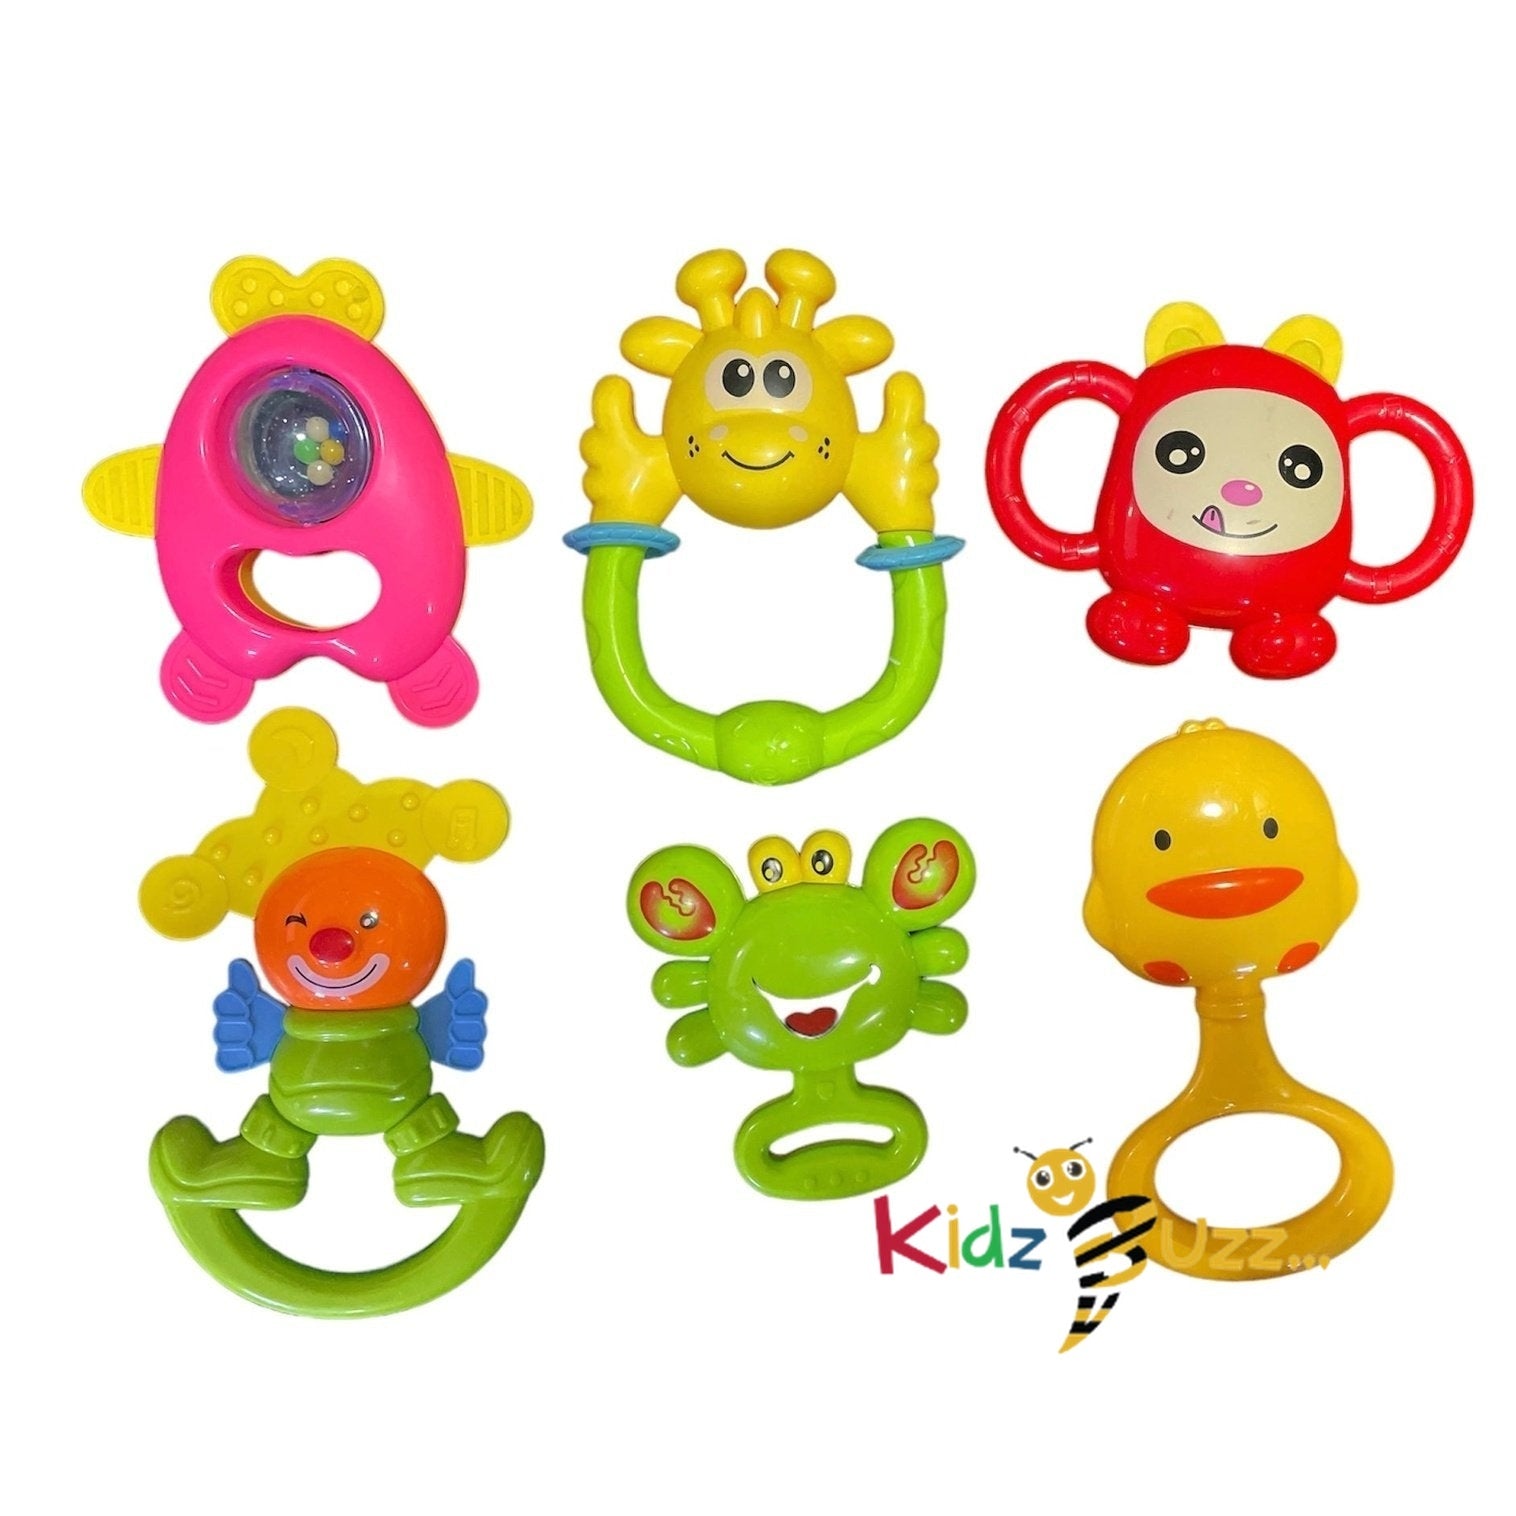 Baby Rattle Teether Toys Set Newborn Toy 0-6 Months Baby Funtime Rattles Sound